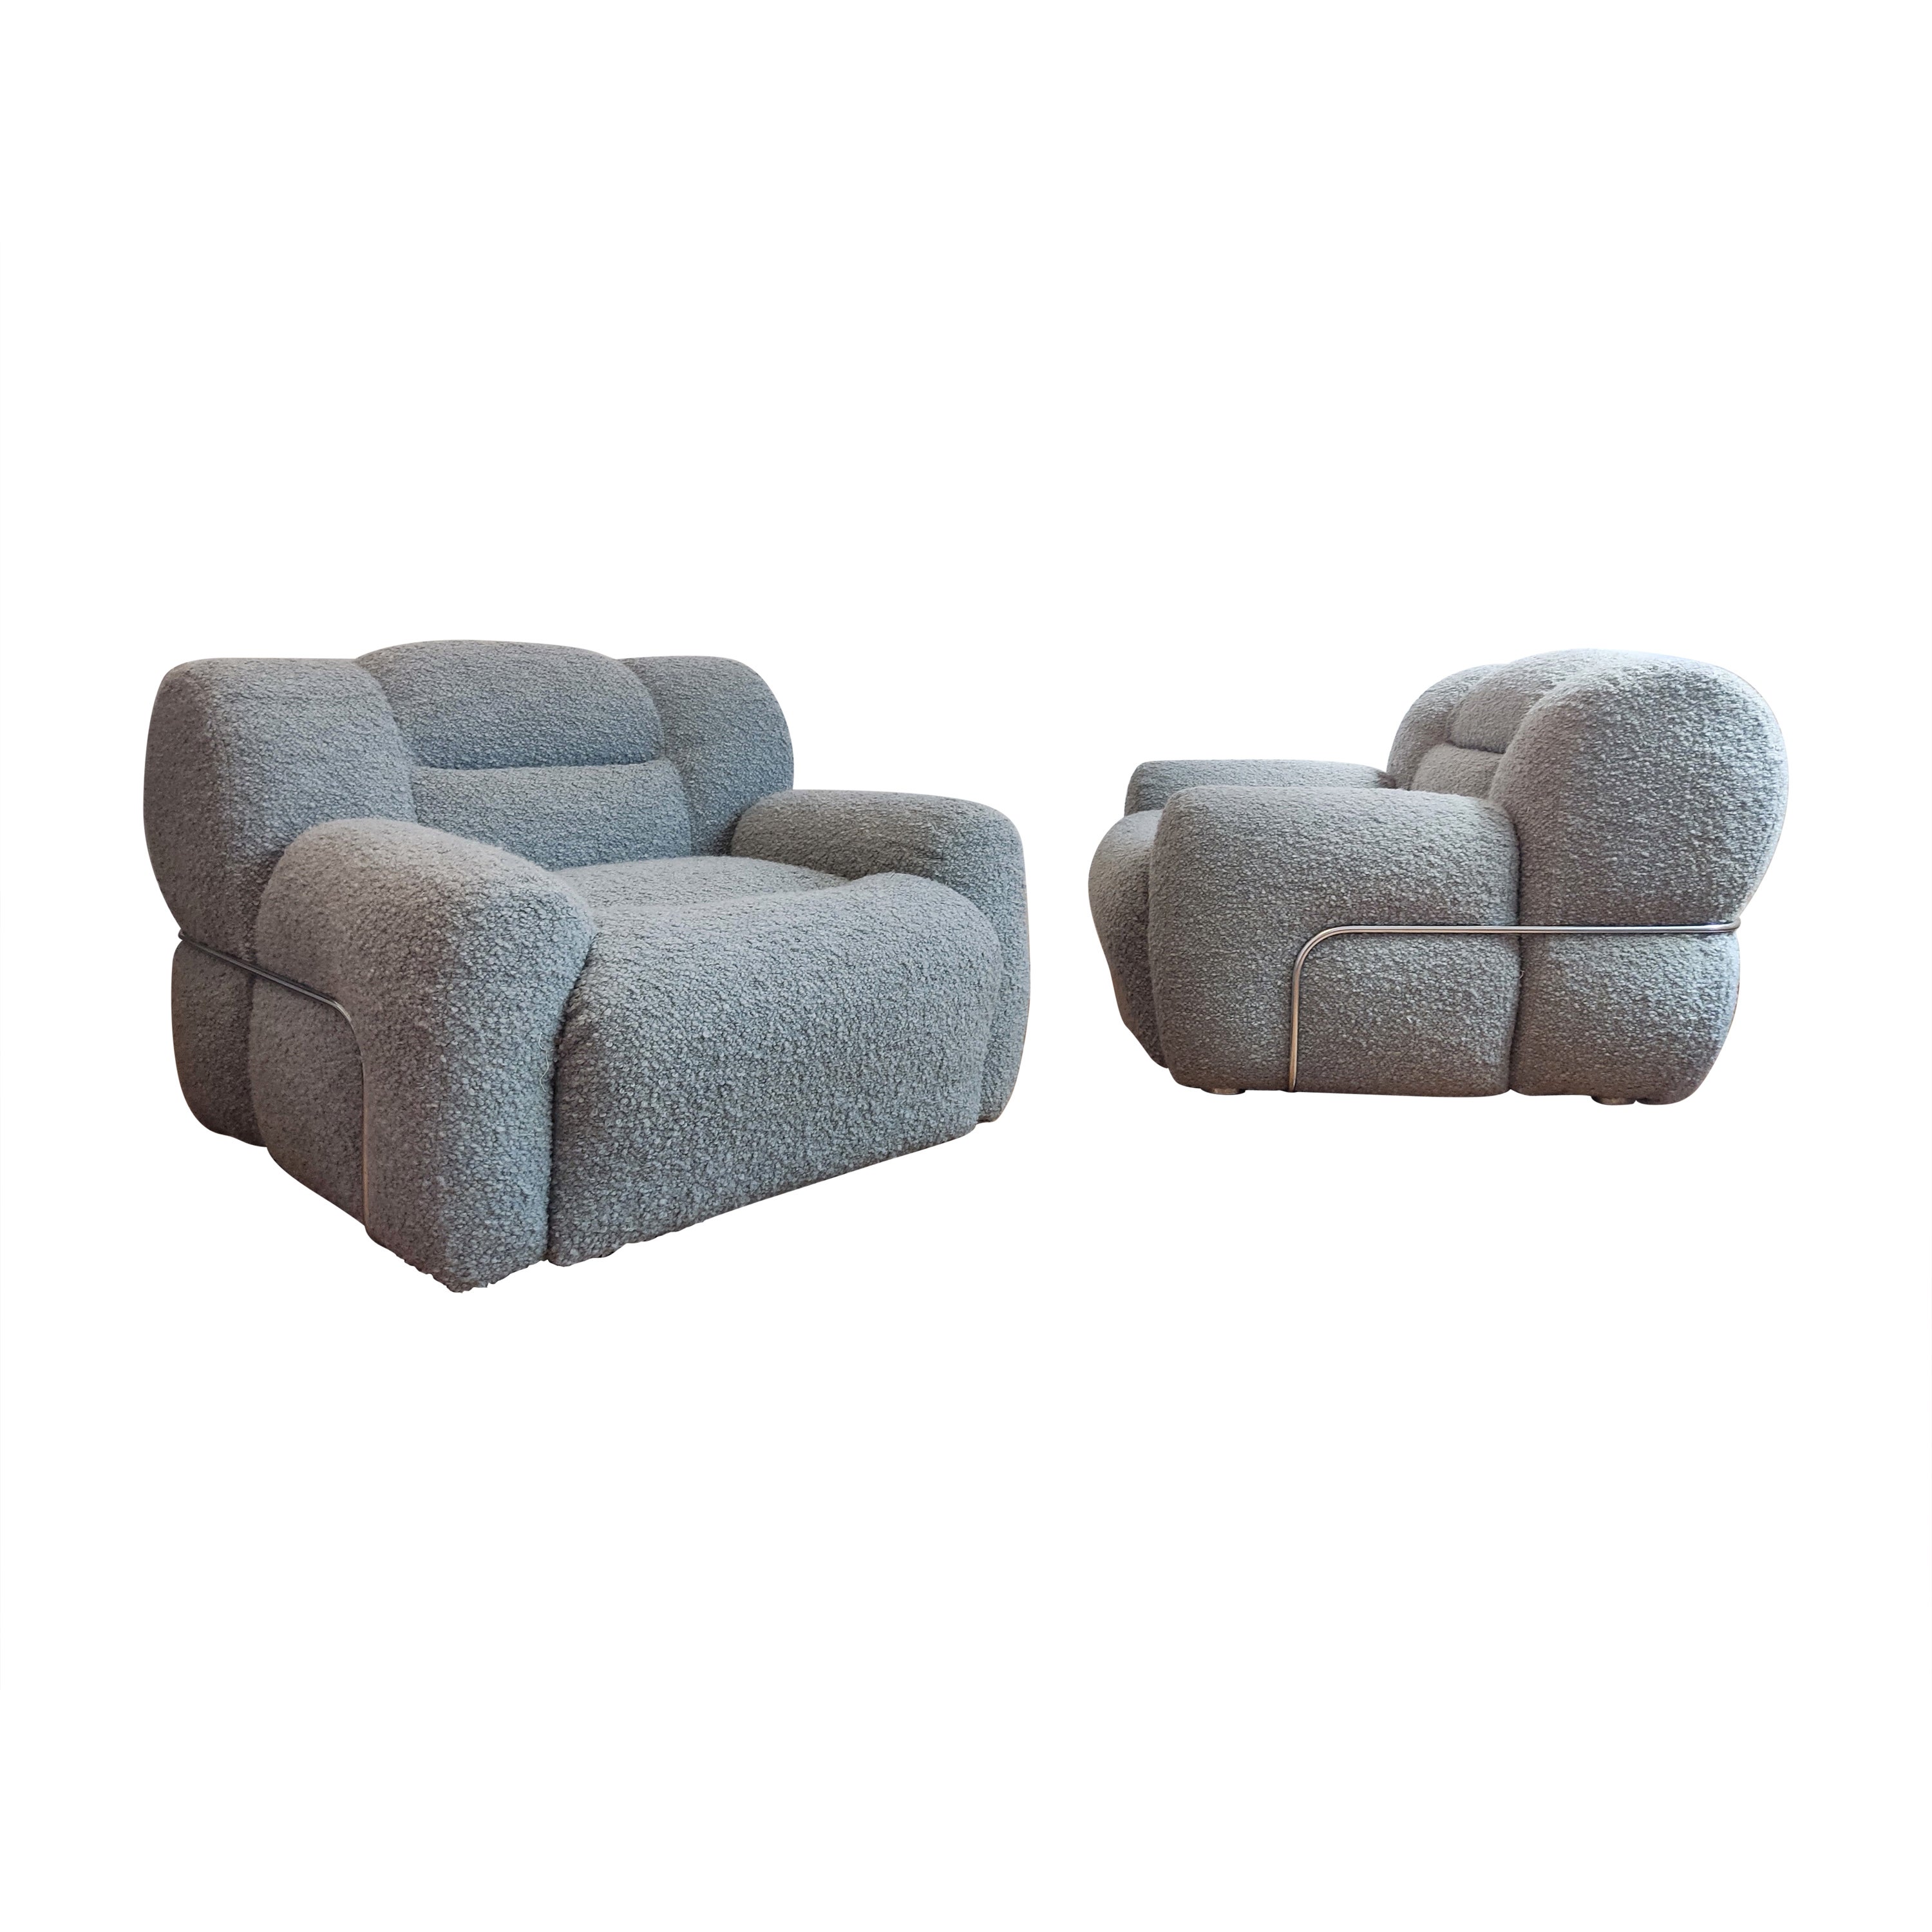 Pair of 1970's Grey Bouclé and Chrome Lounge Chairs - Italy 1970's For Sale